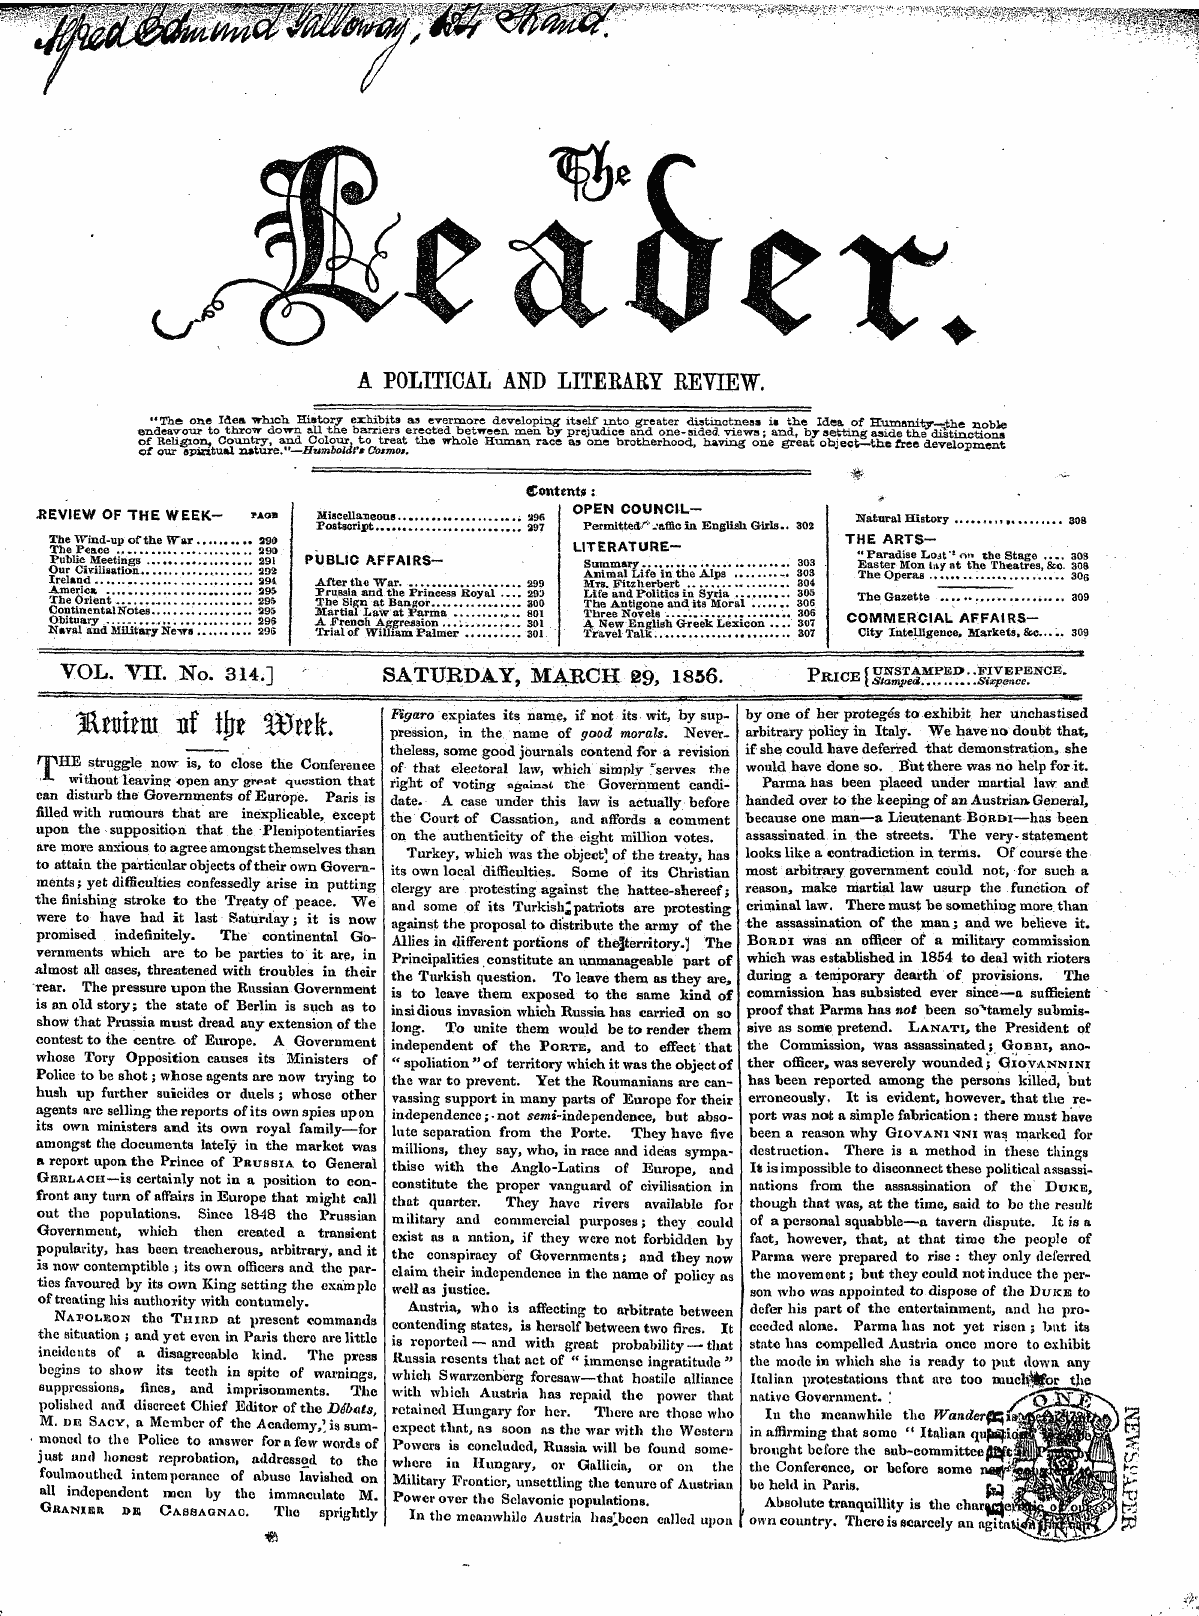 Leader (1850-1860): jS F Y, 2nd edition: 1